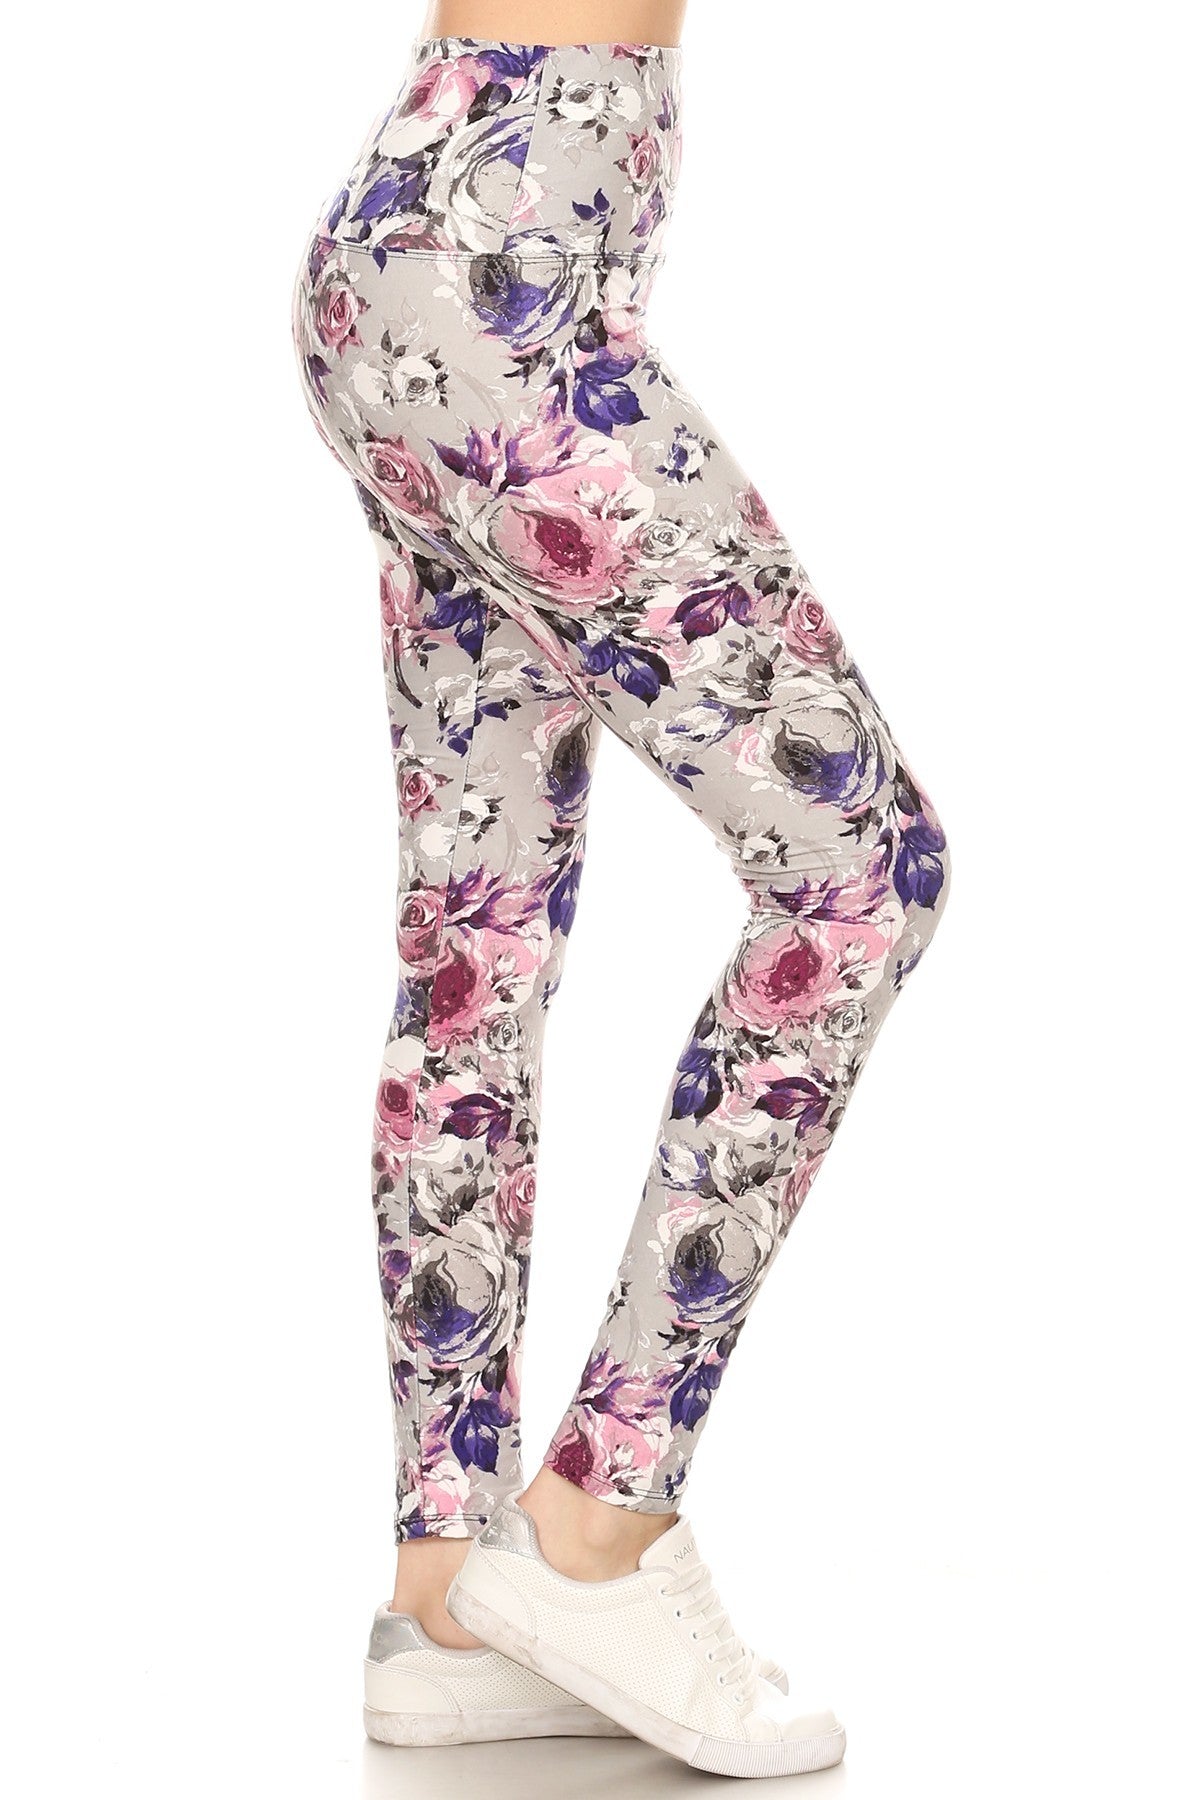 5-inch Long Yoga Style Banded Lined Floral Printed Knit Legging With High Waist-56735.Multi--Love It Clothing